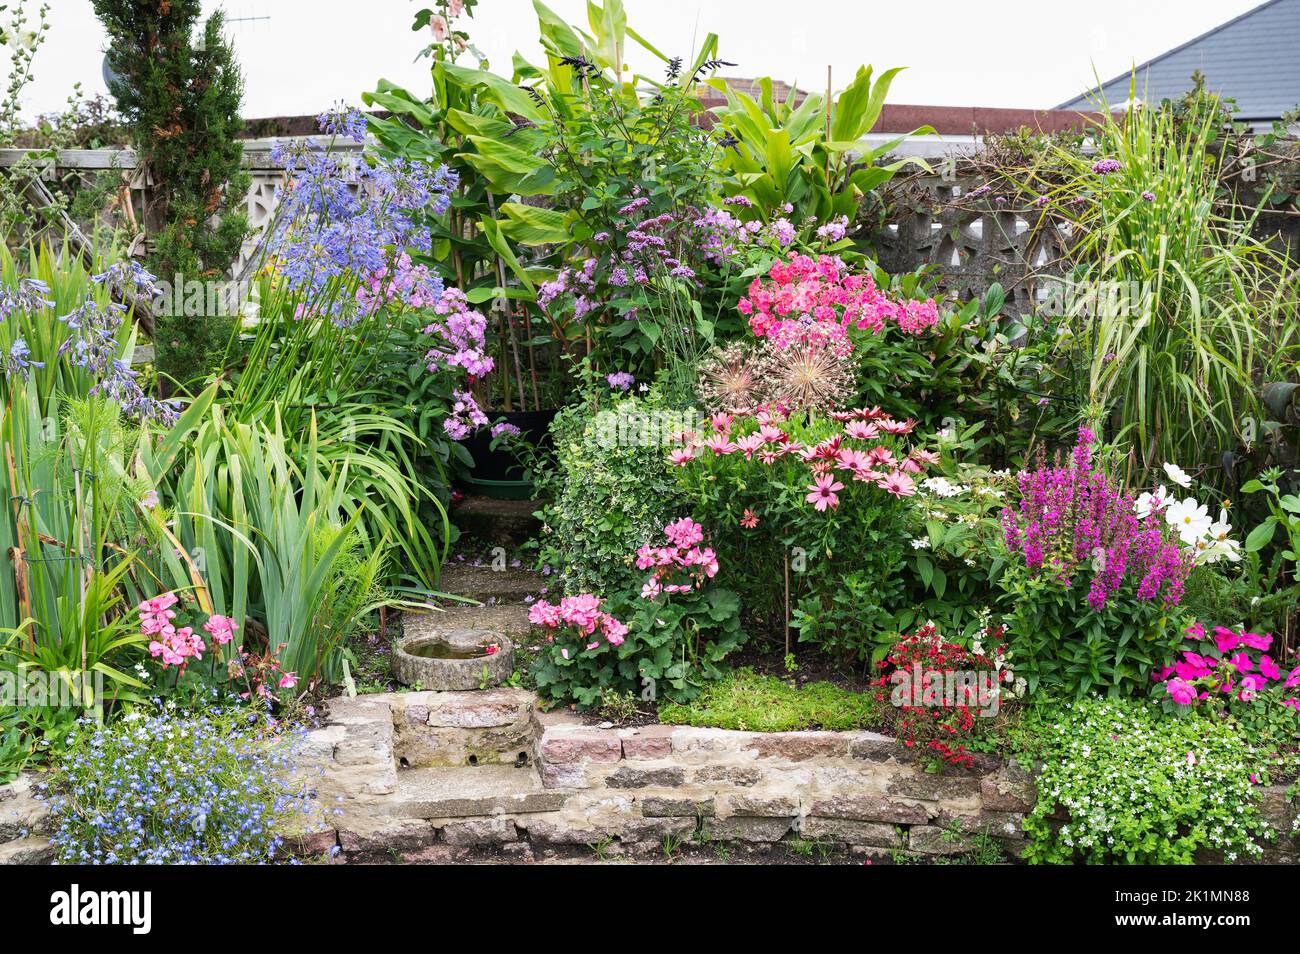 Beautiful potted flowers arrangements in the garden Stock Photo